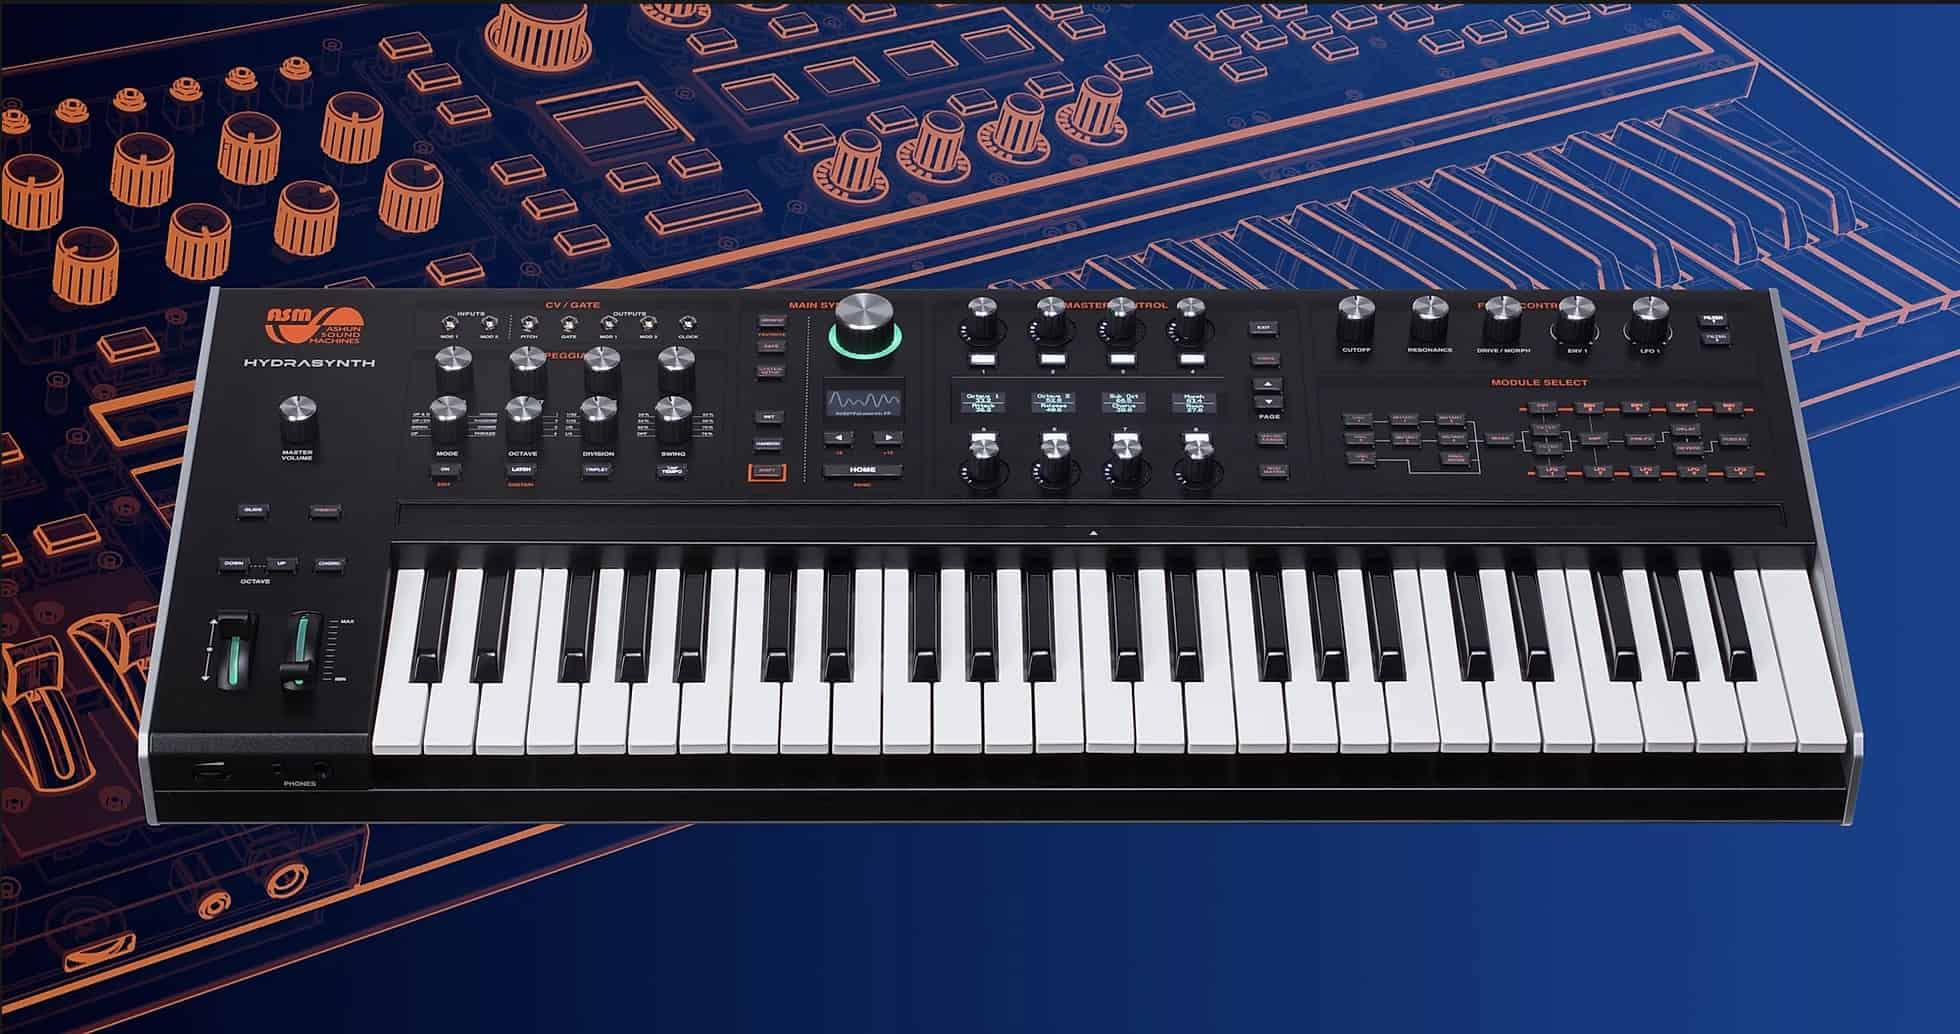 Ashun Sound Machines (ASM) Introduces Hydrasynth with Version 1.3.0 Firmware Update